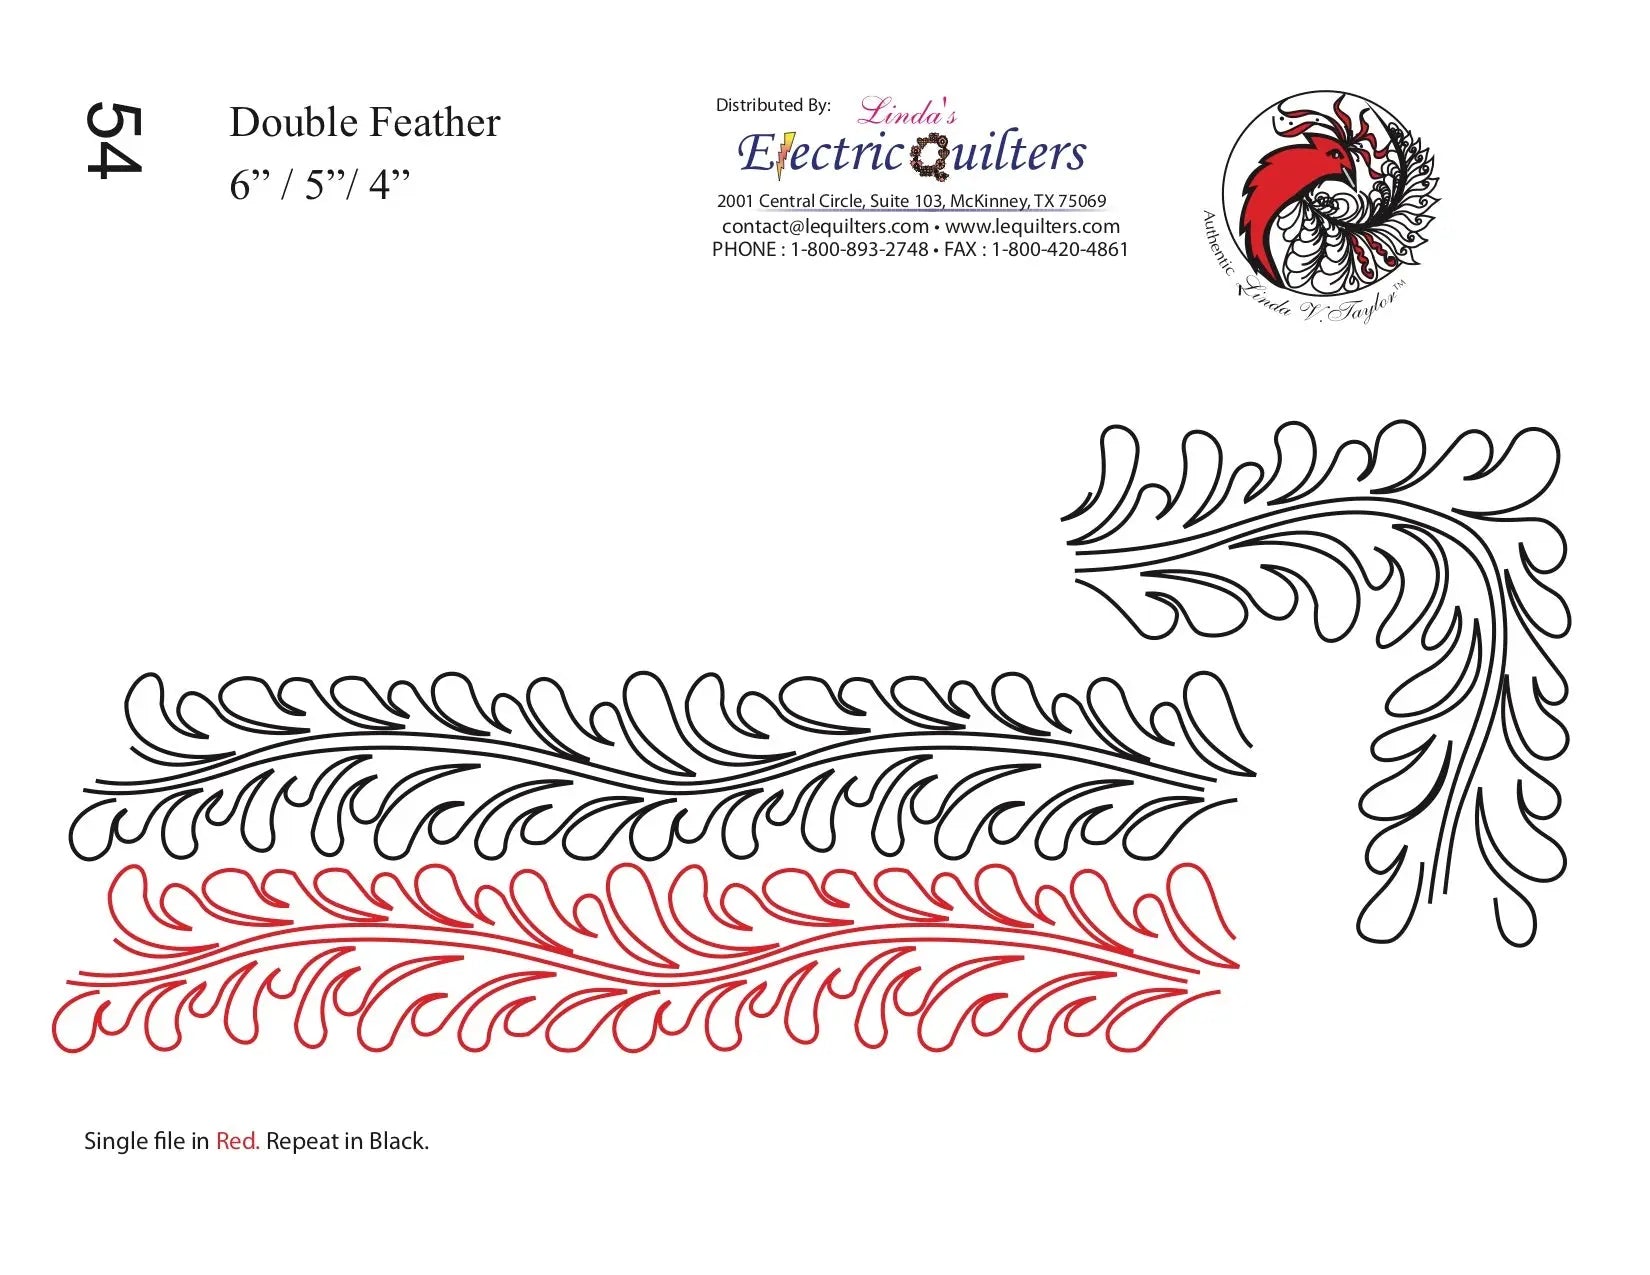 054 Double Feather Pantograph by Linda V. Taylor - Linda's Electric Quilters